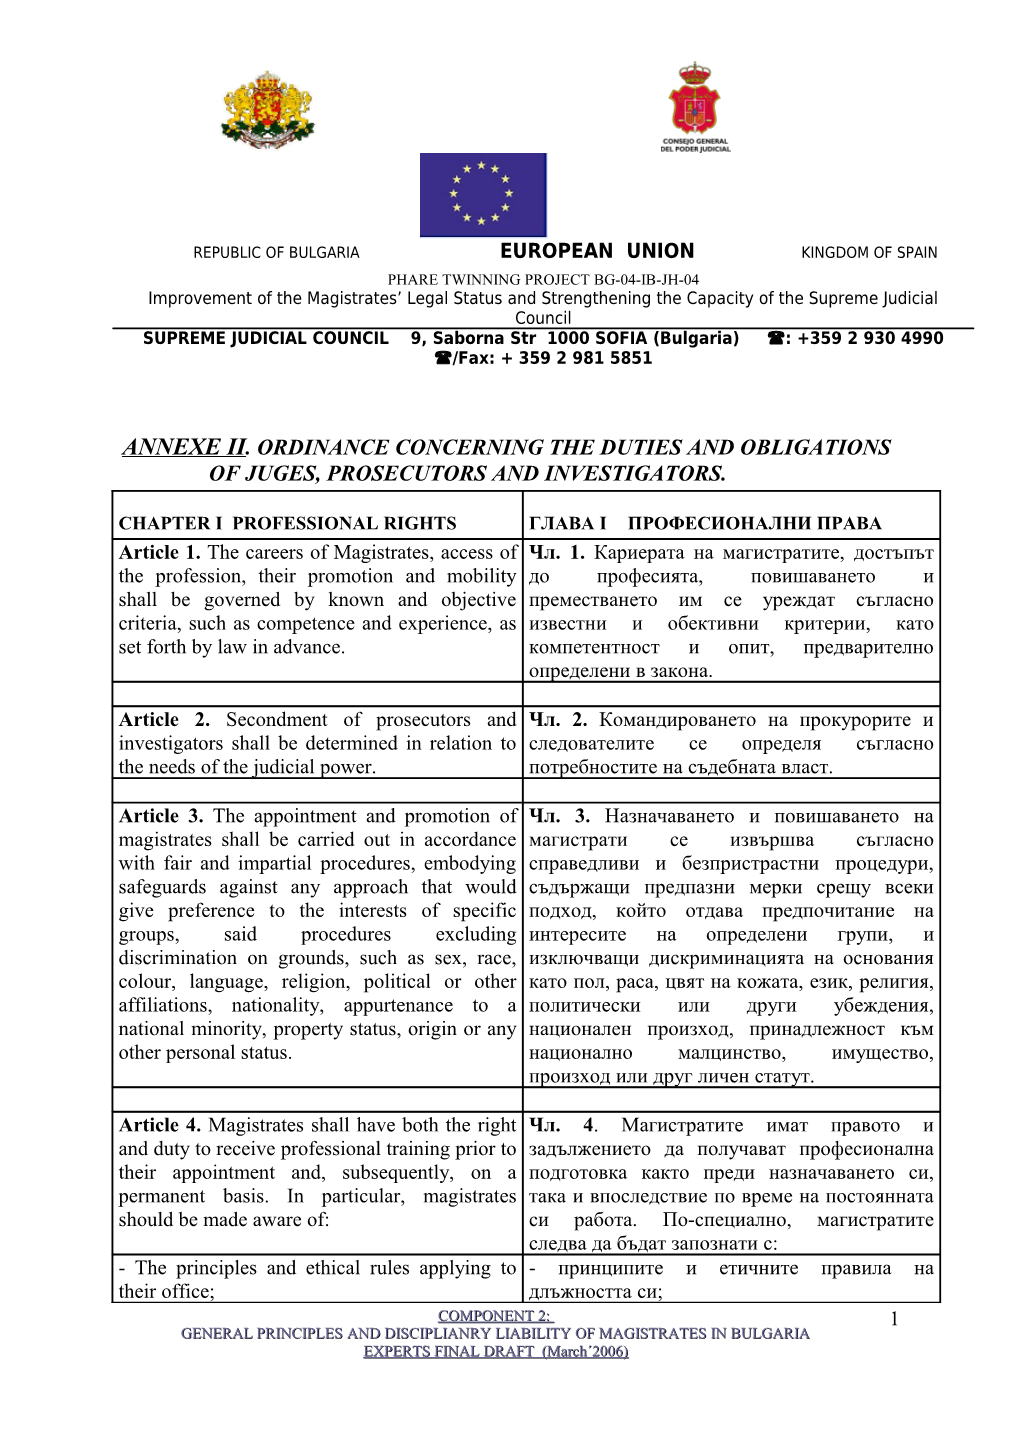 Annexe Ii. Ordinance Concerning the Duties and Obligations of Juges, Prosecutors And